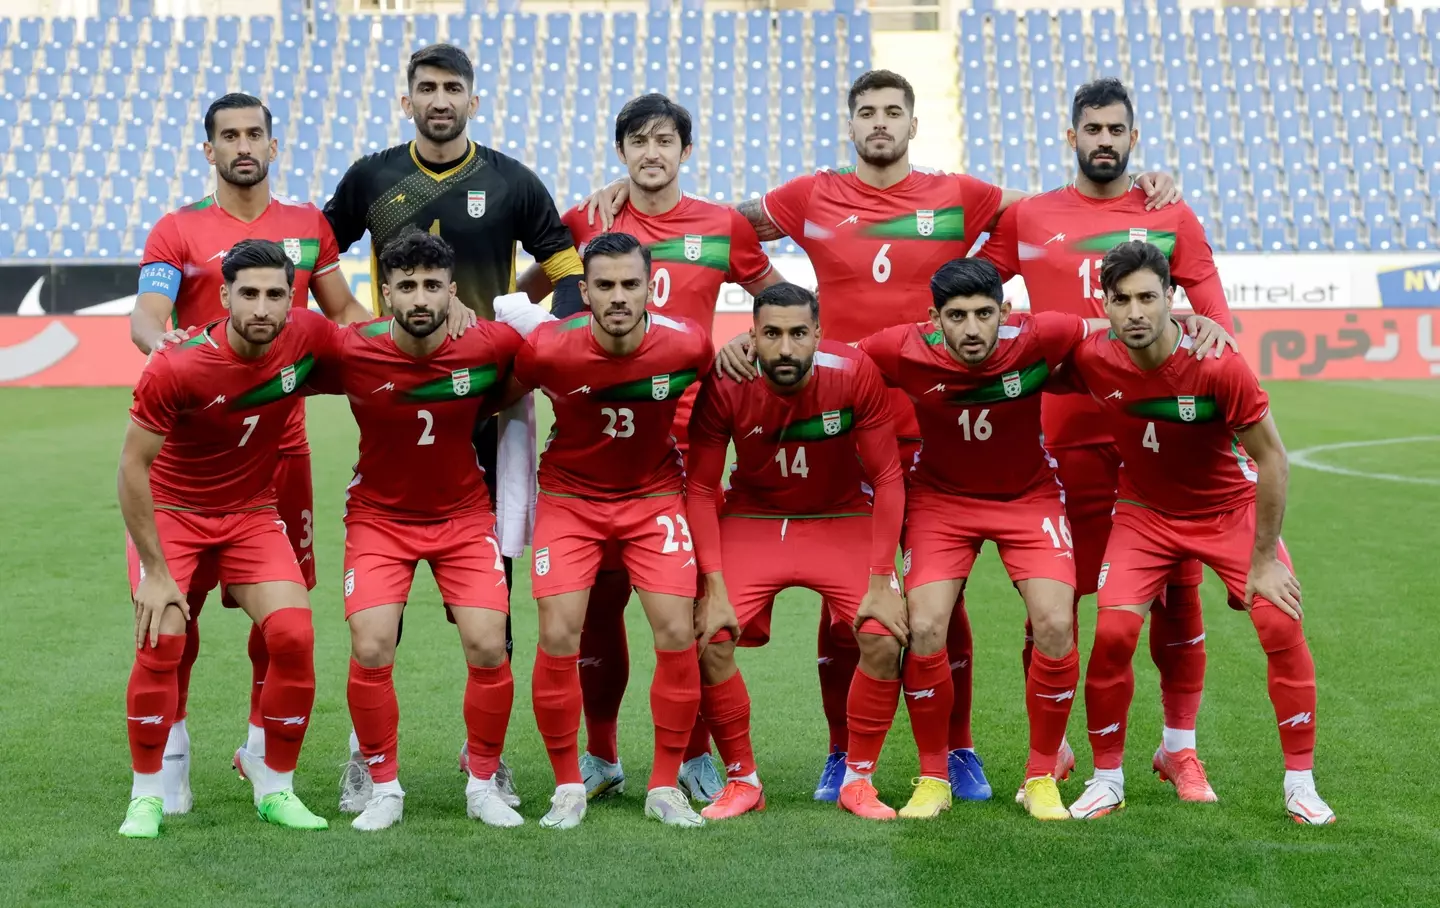 There have also been calls for Iran to be excluded from the World Cup (Image: Alamy)